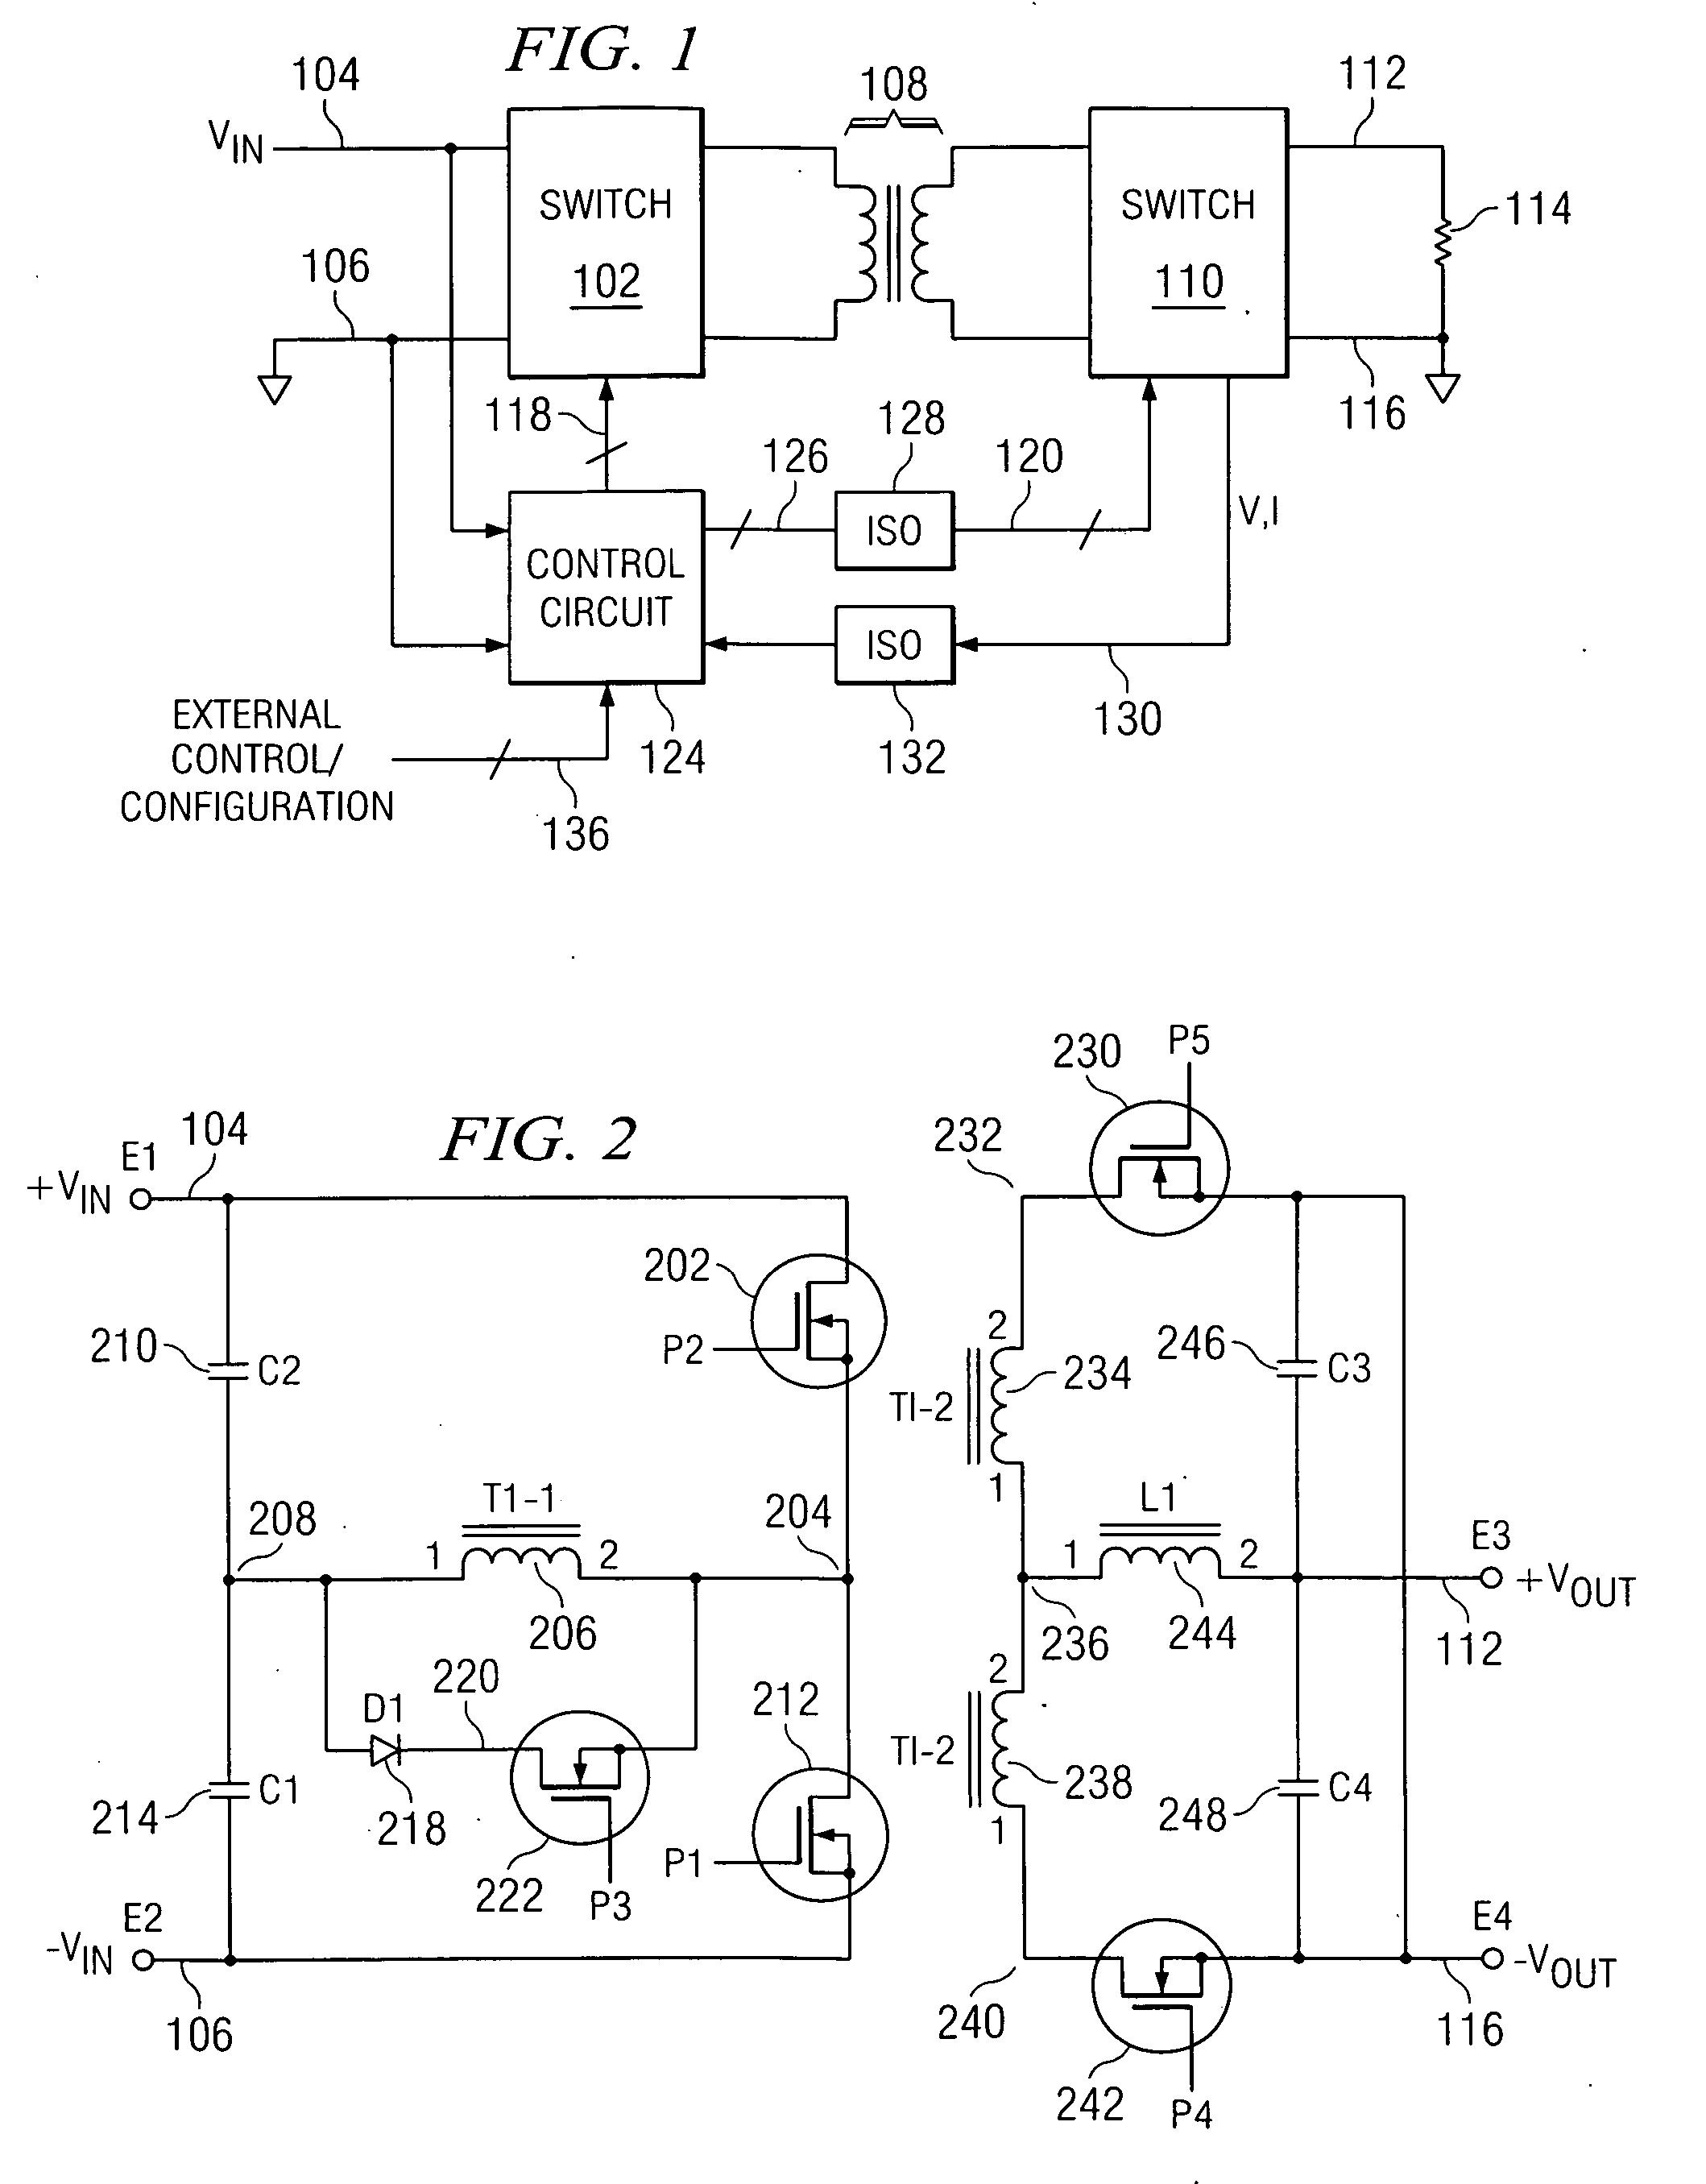 In system analysis and compensation for a digital PWM controller